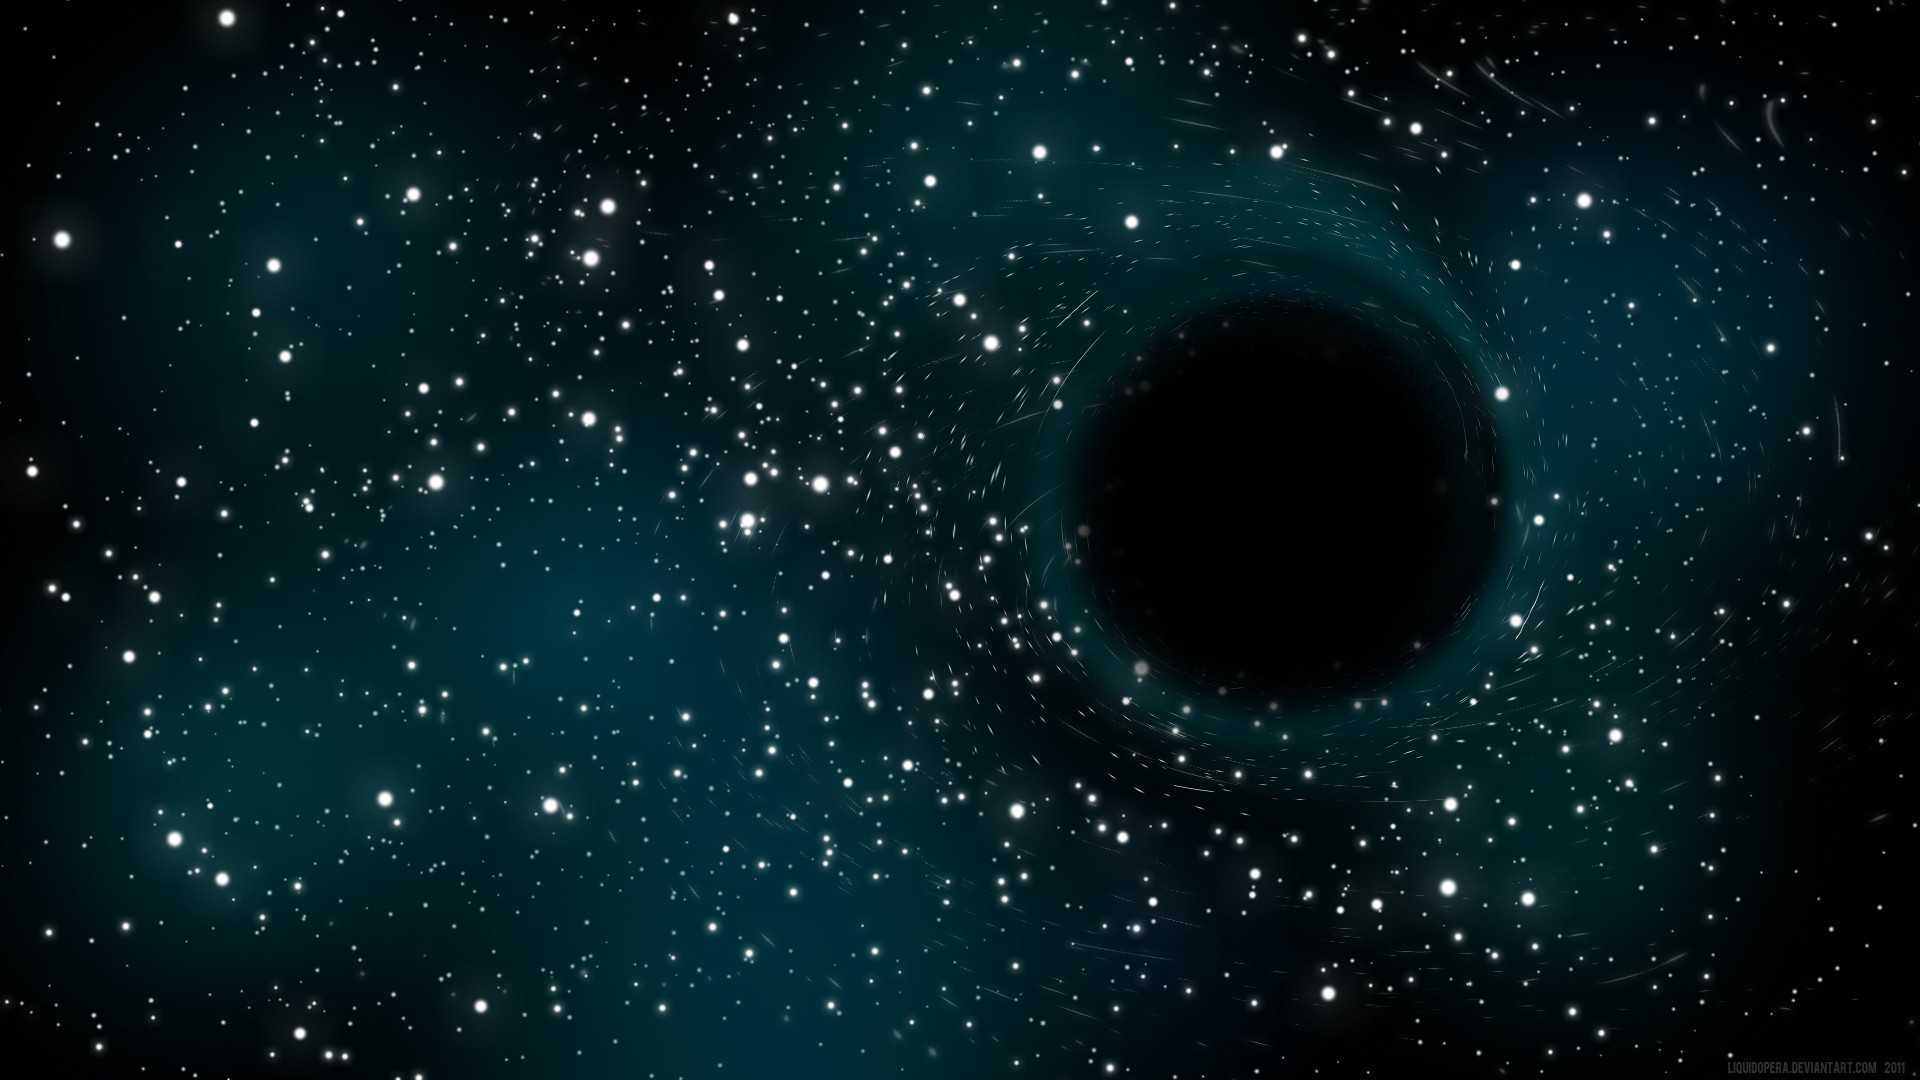 1920x1080 Supermassive Black Hole Wallpaper 25247 Hd Wallpapers in Space.